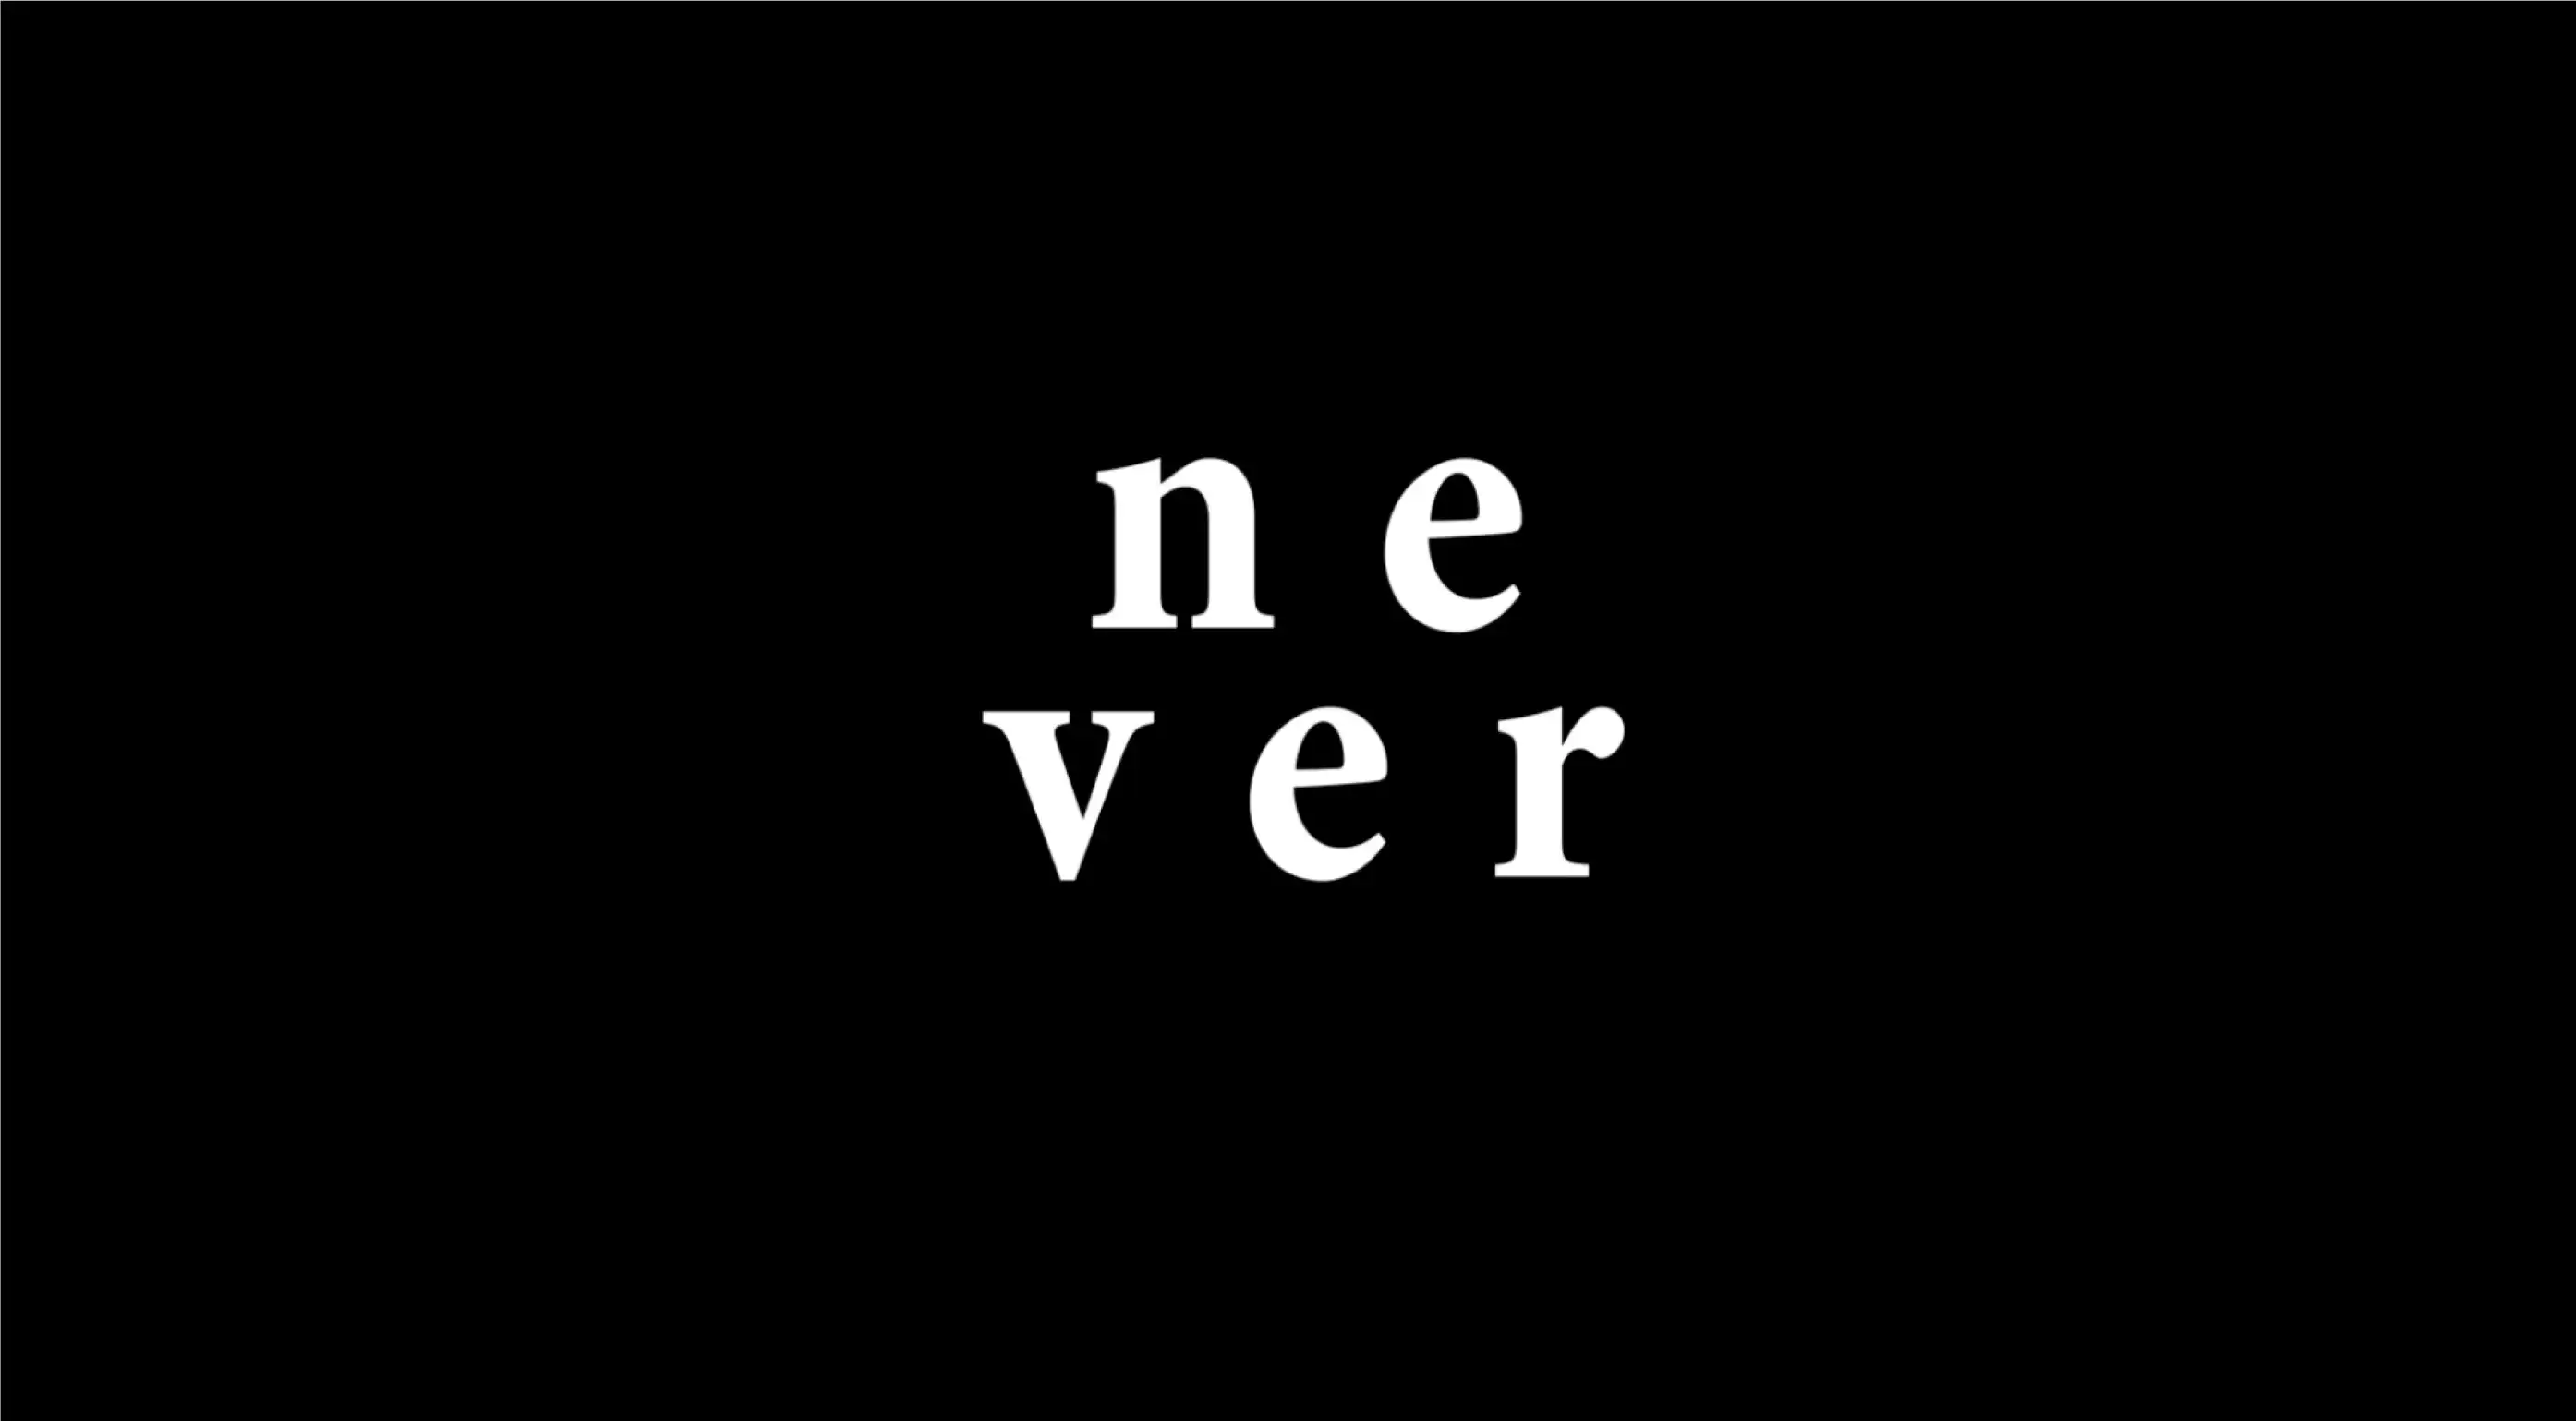 The word 'never' written over a blank, black background